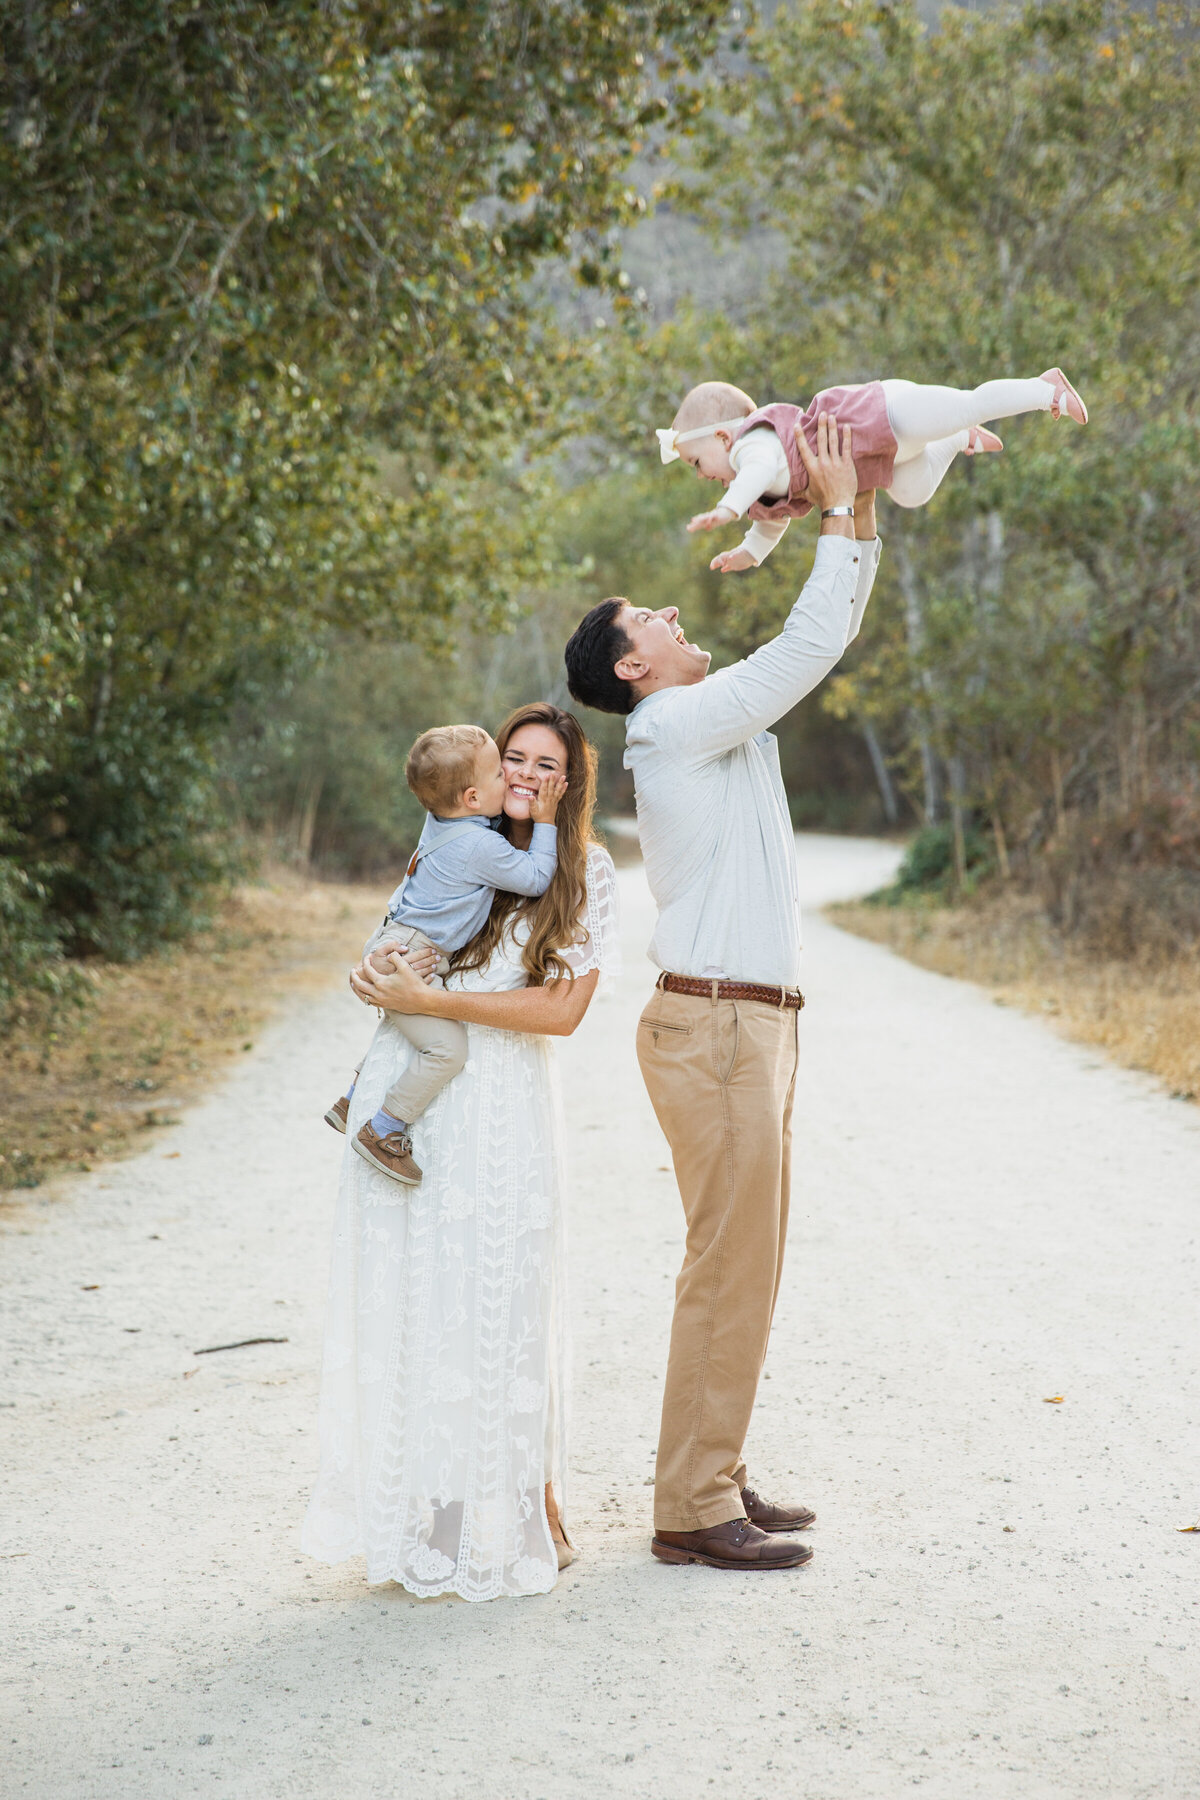 Rustic photography in Carmel Valley